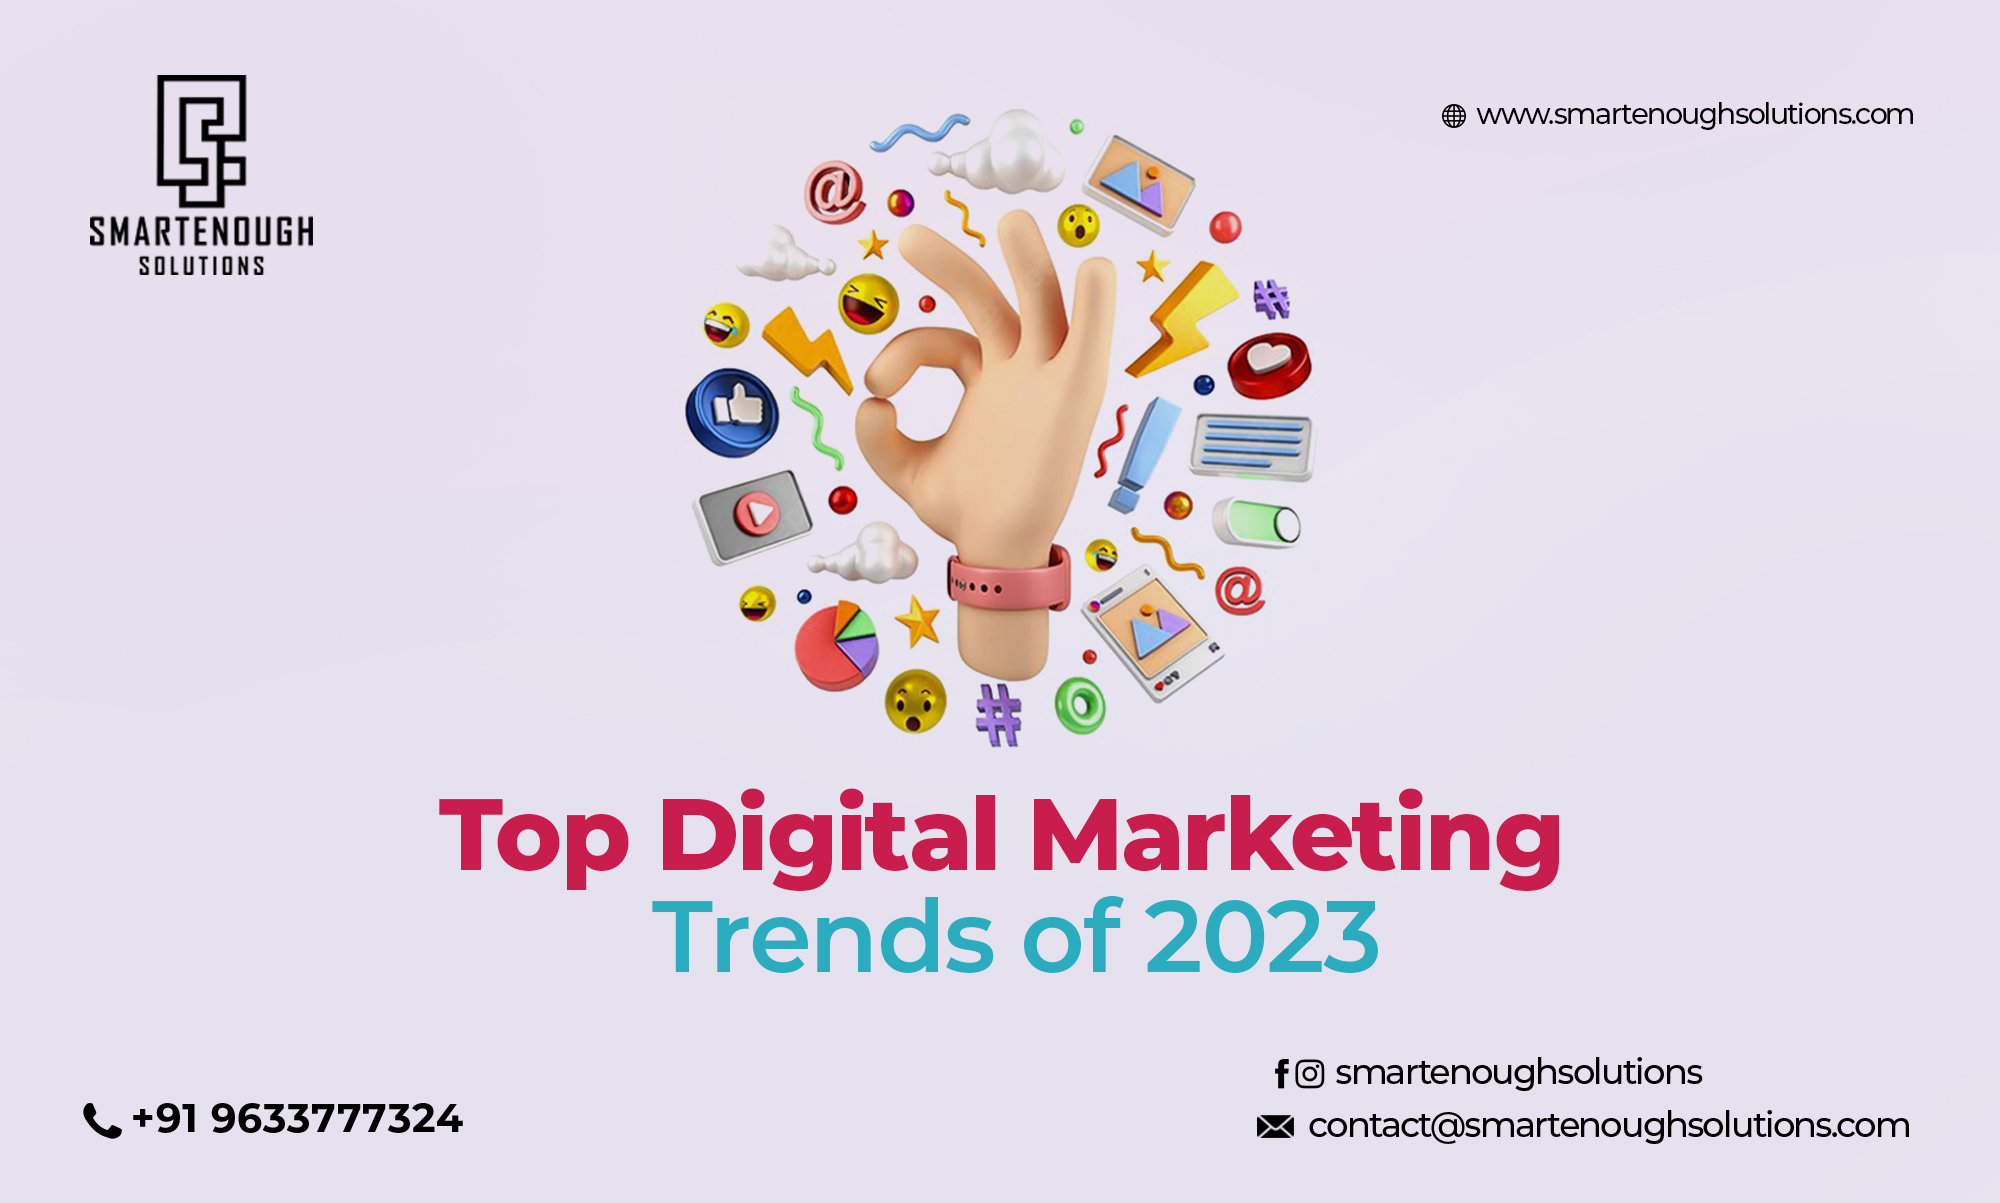 THE TOP DIGITAL MARKETING TRENDS OF 2023